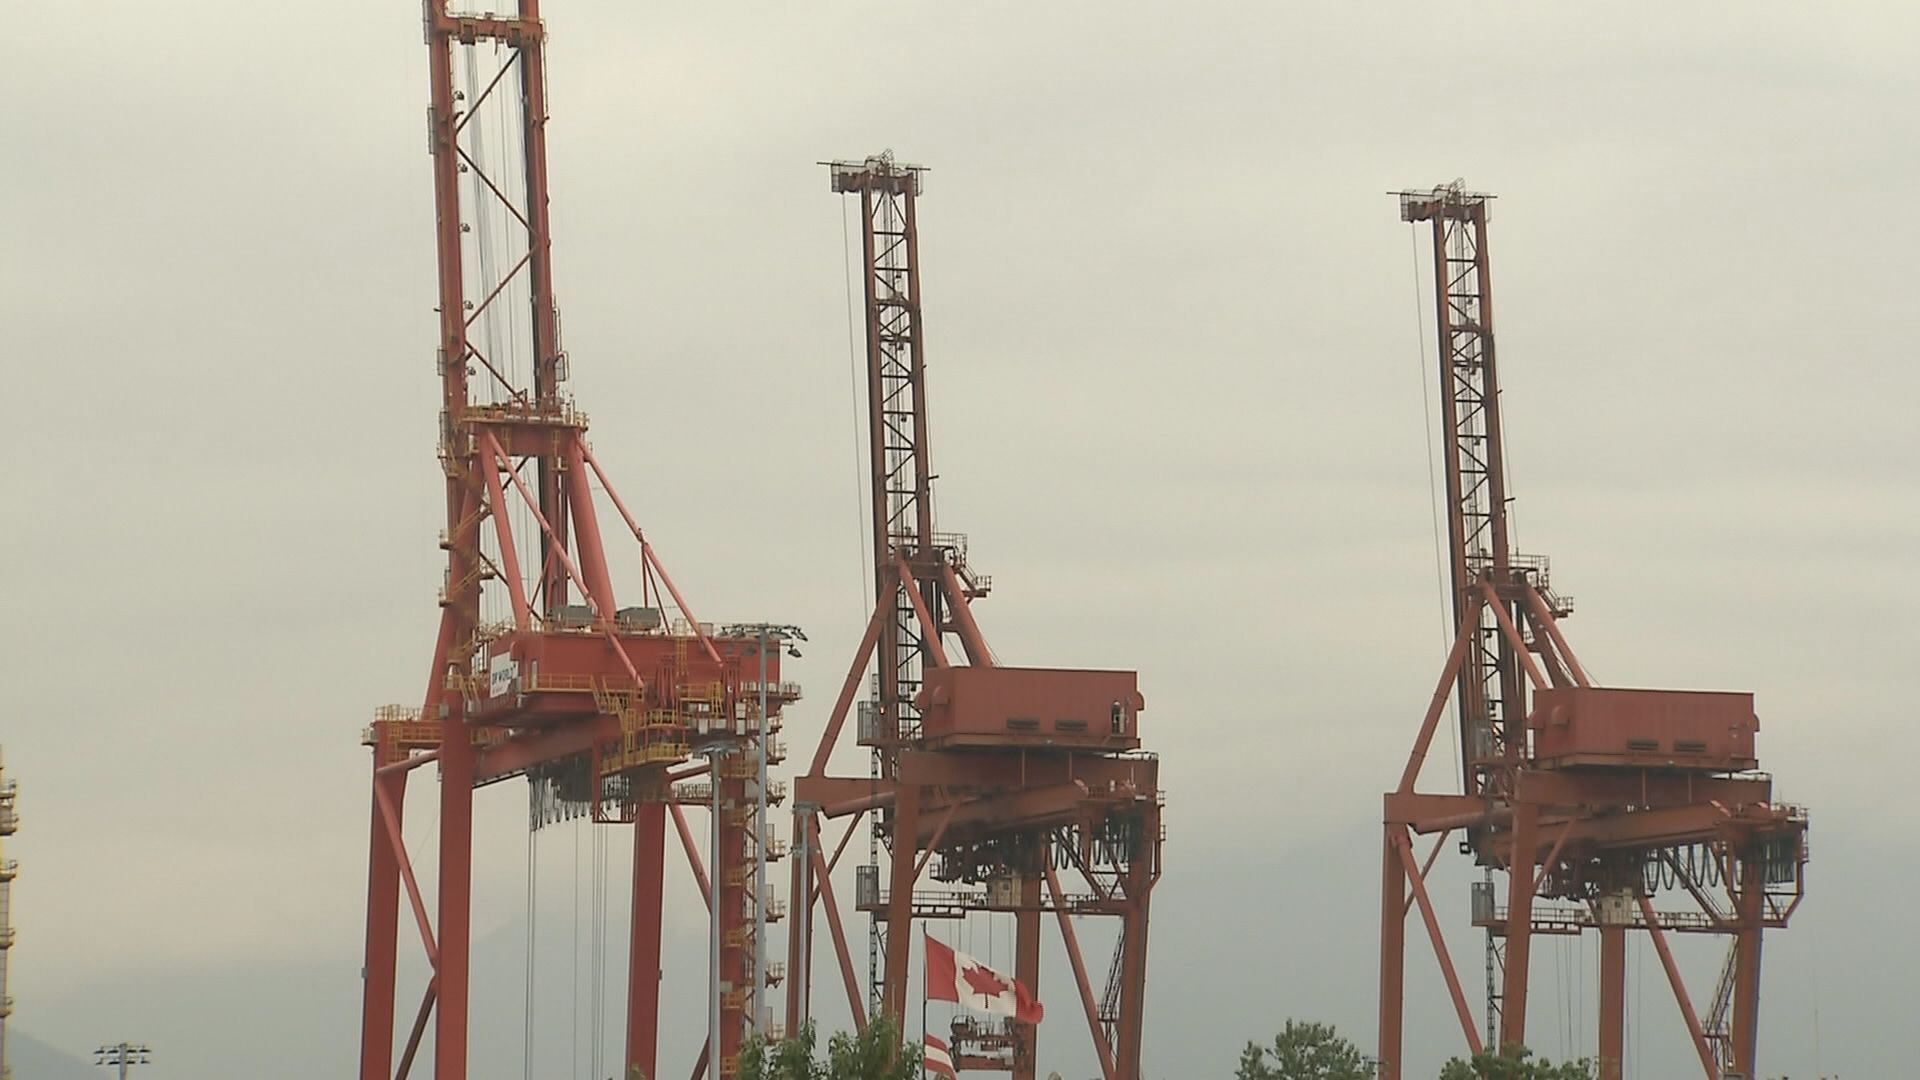 BCMEA calls on Industrial Relations Board to prevent dockworkers’ strikes